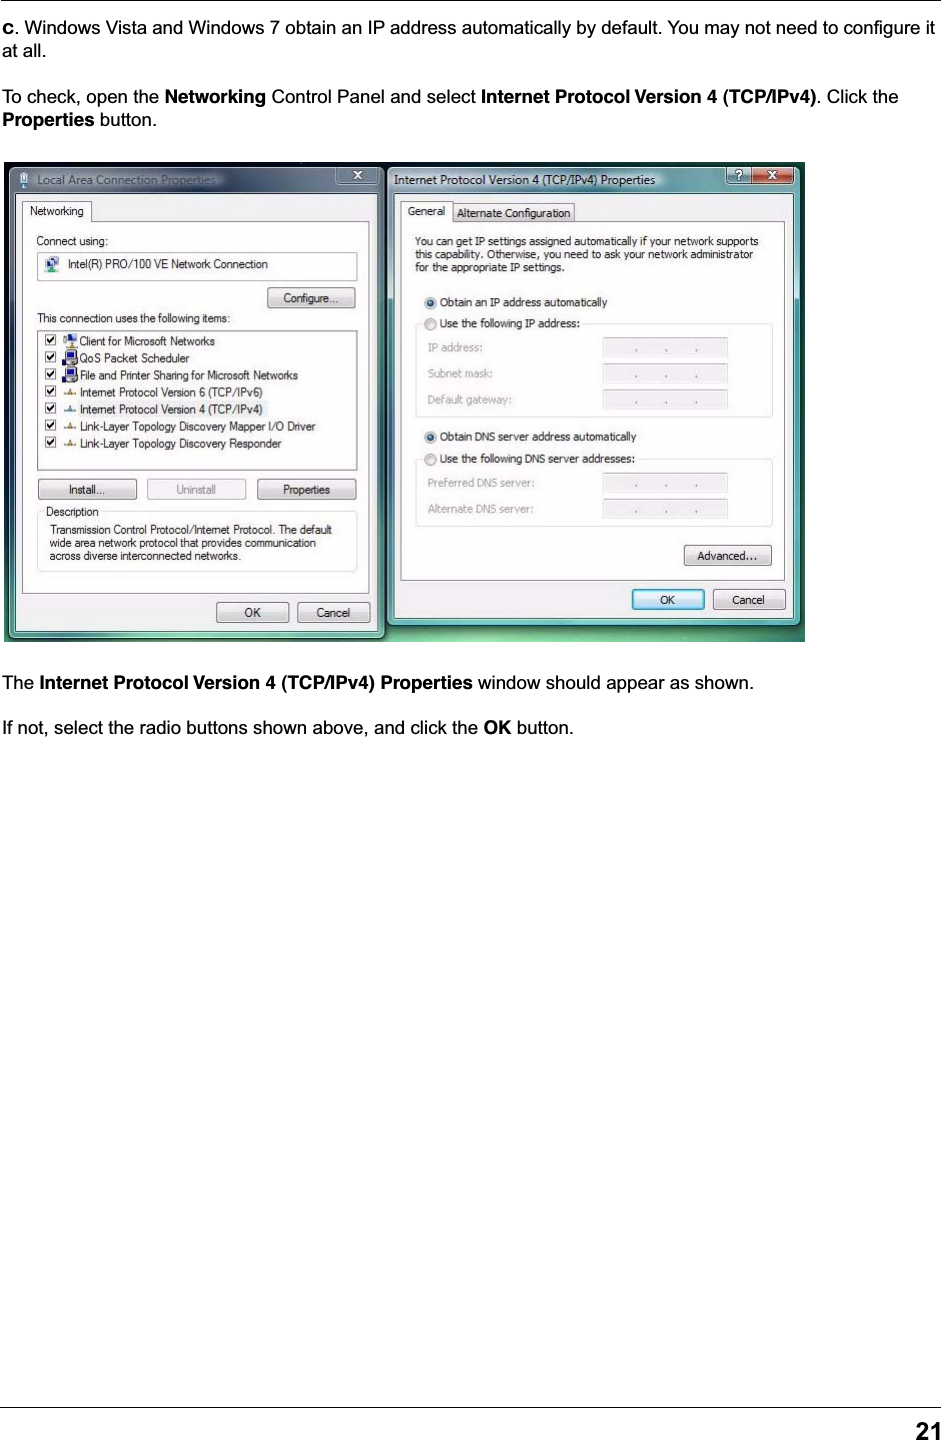 21c. Windows Vista and Windows 7 obtain an IP address automatically by default. You may not need to configure it at all.To check, open the Networking Control Panel and select Internet Protocol Version 4 (TCP/IPv4). Click the Properties button.The Internet Protocol Version 4 (TCP/IPv4) Properties window should appear as shown.If not, select the radio buttons shown above, and click the OK button.